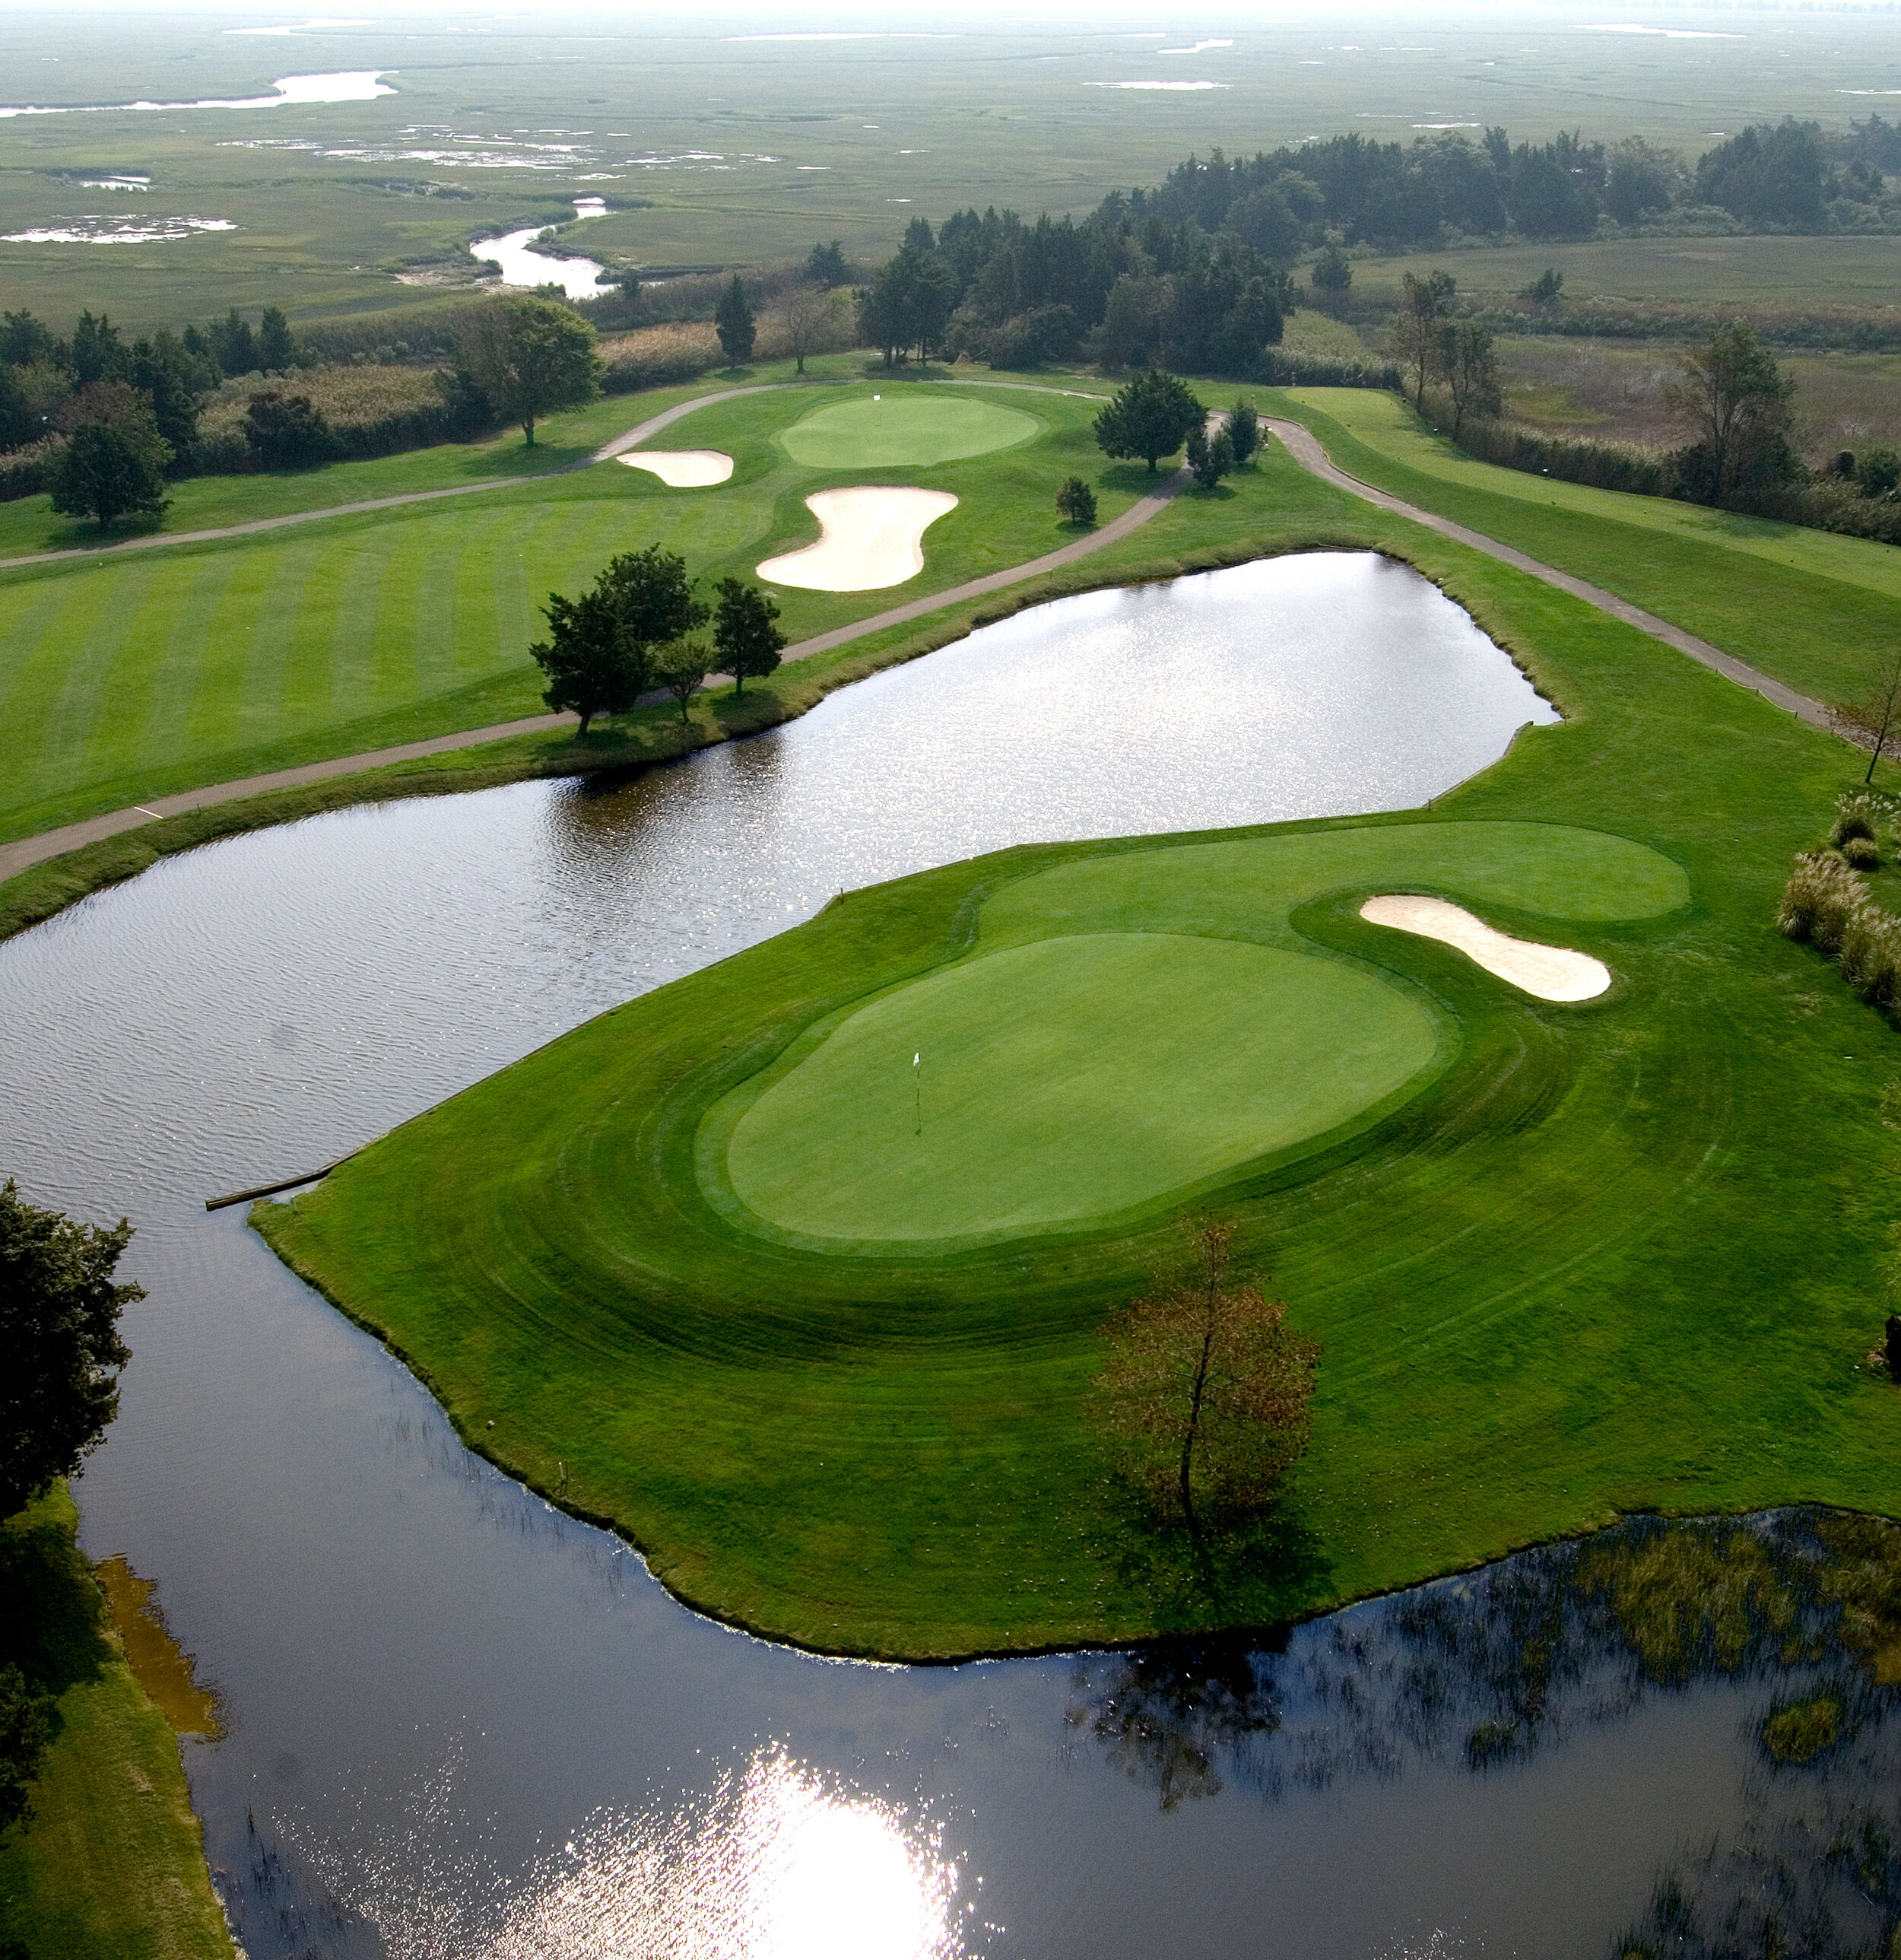 An aerial view of the beautiful golf course.